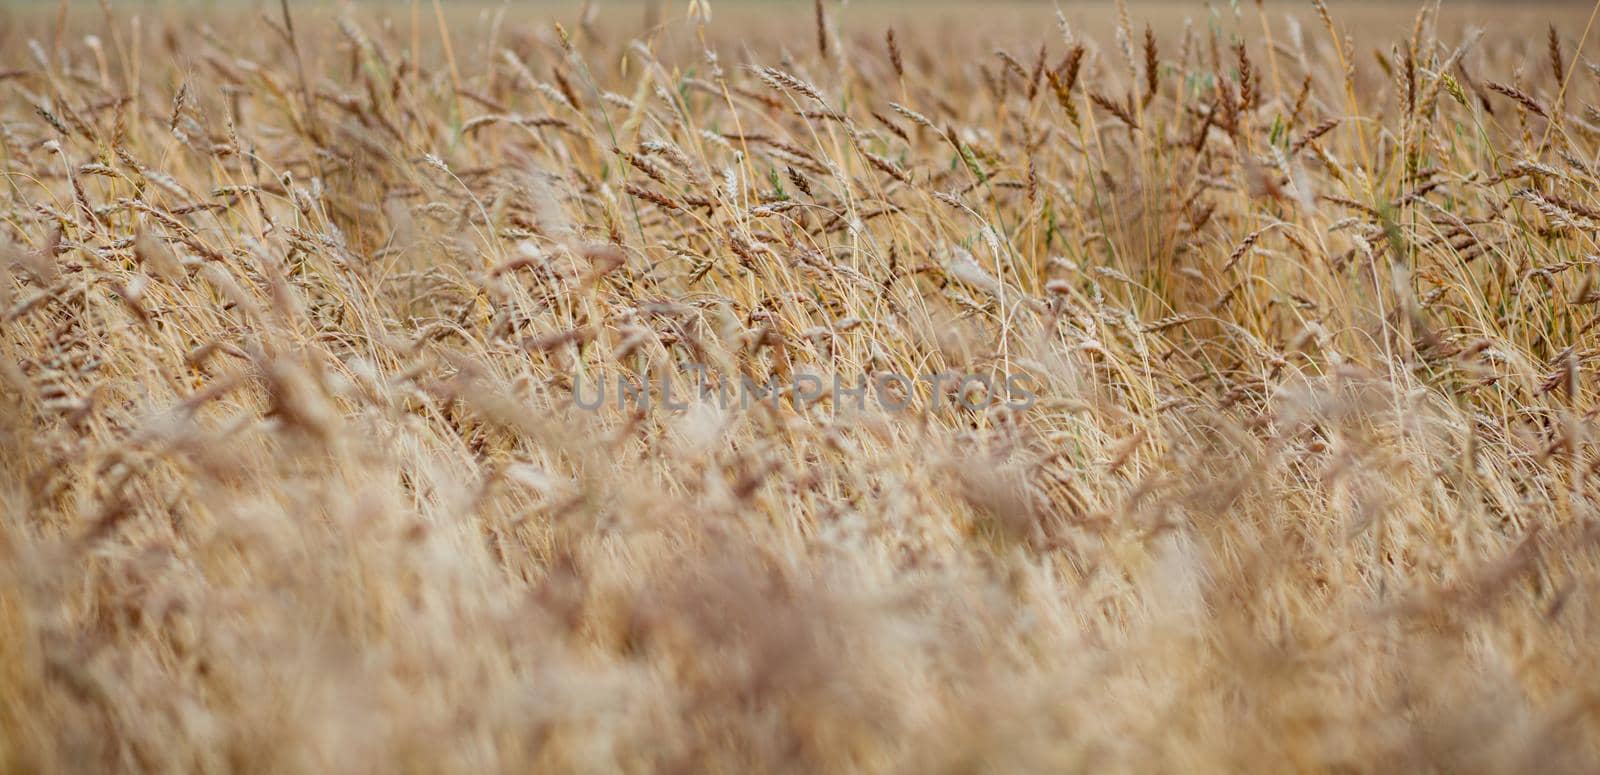 Ears of wheat or rye growing in the field at sunset. A field of rye during the harvest period in an agricultural field.